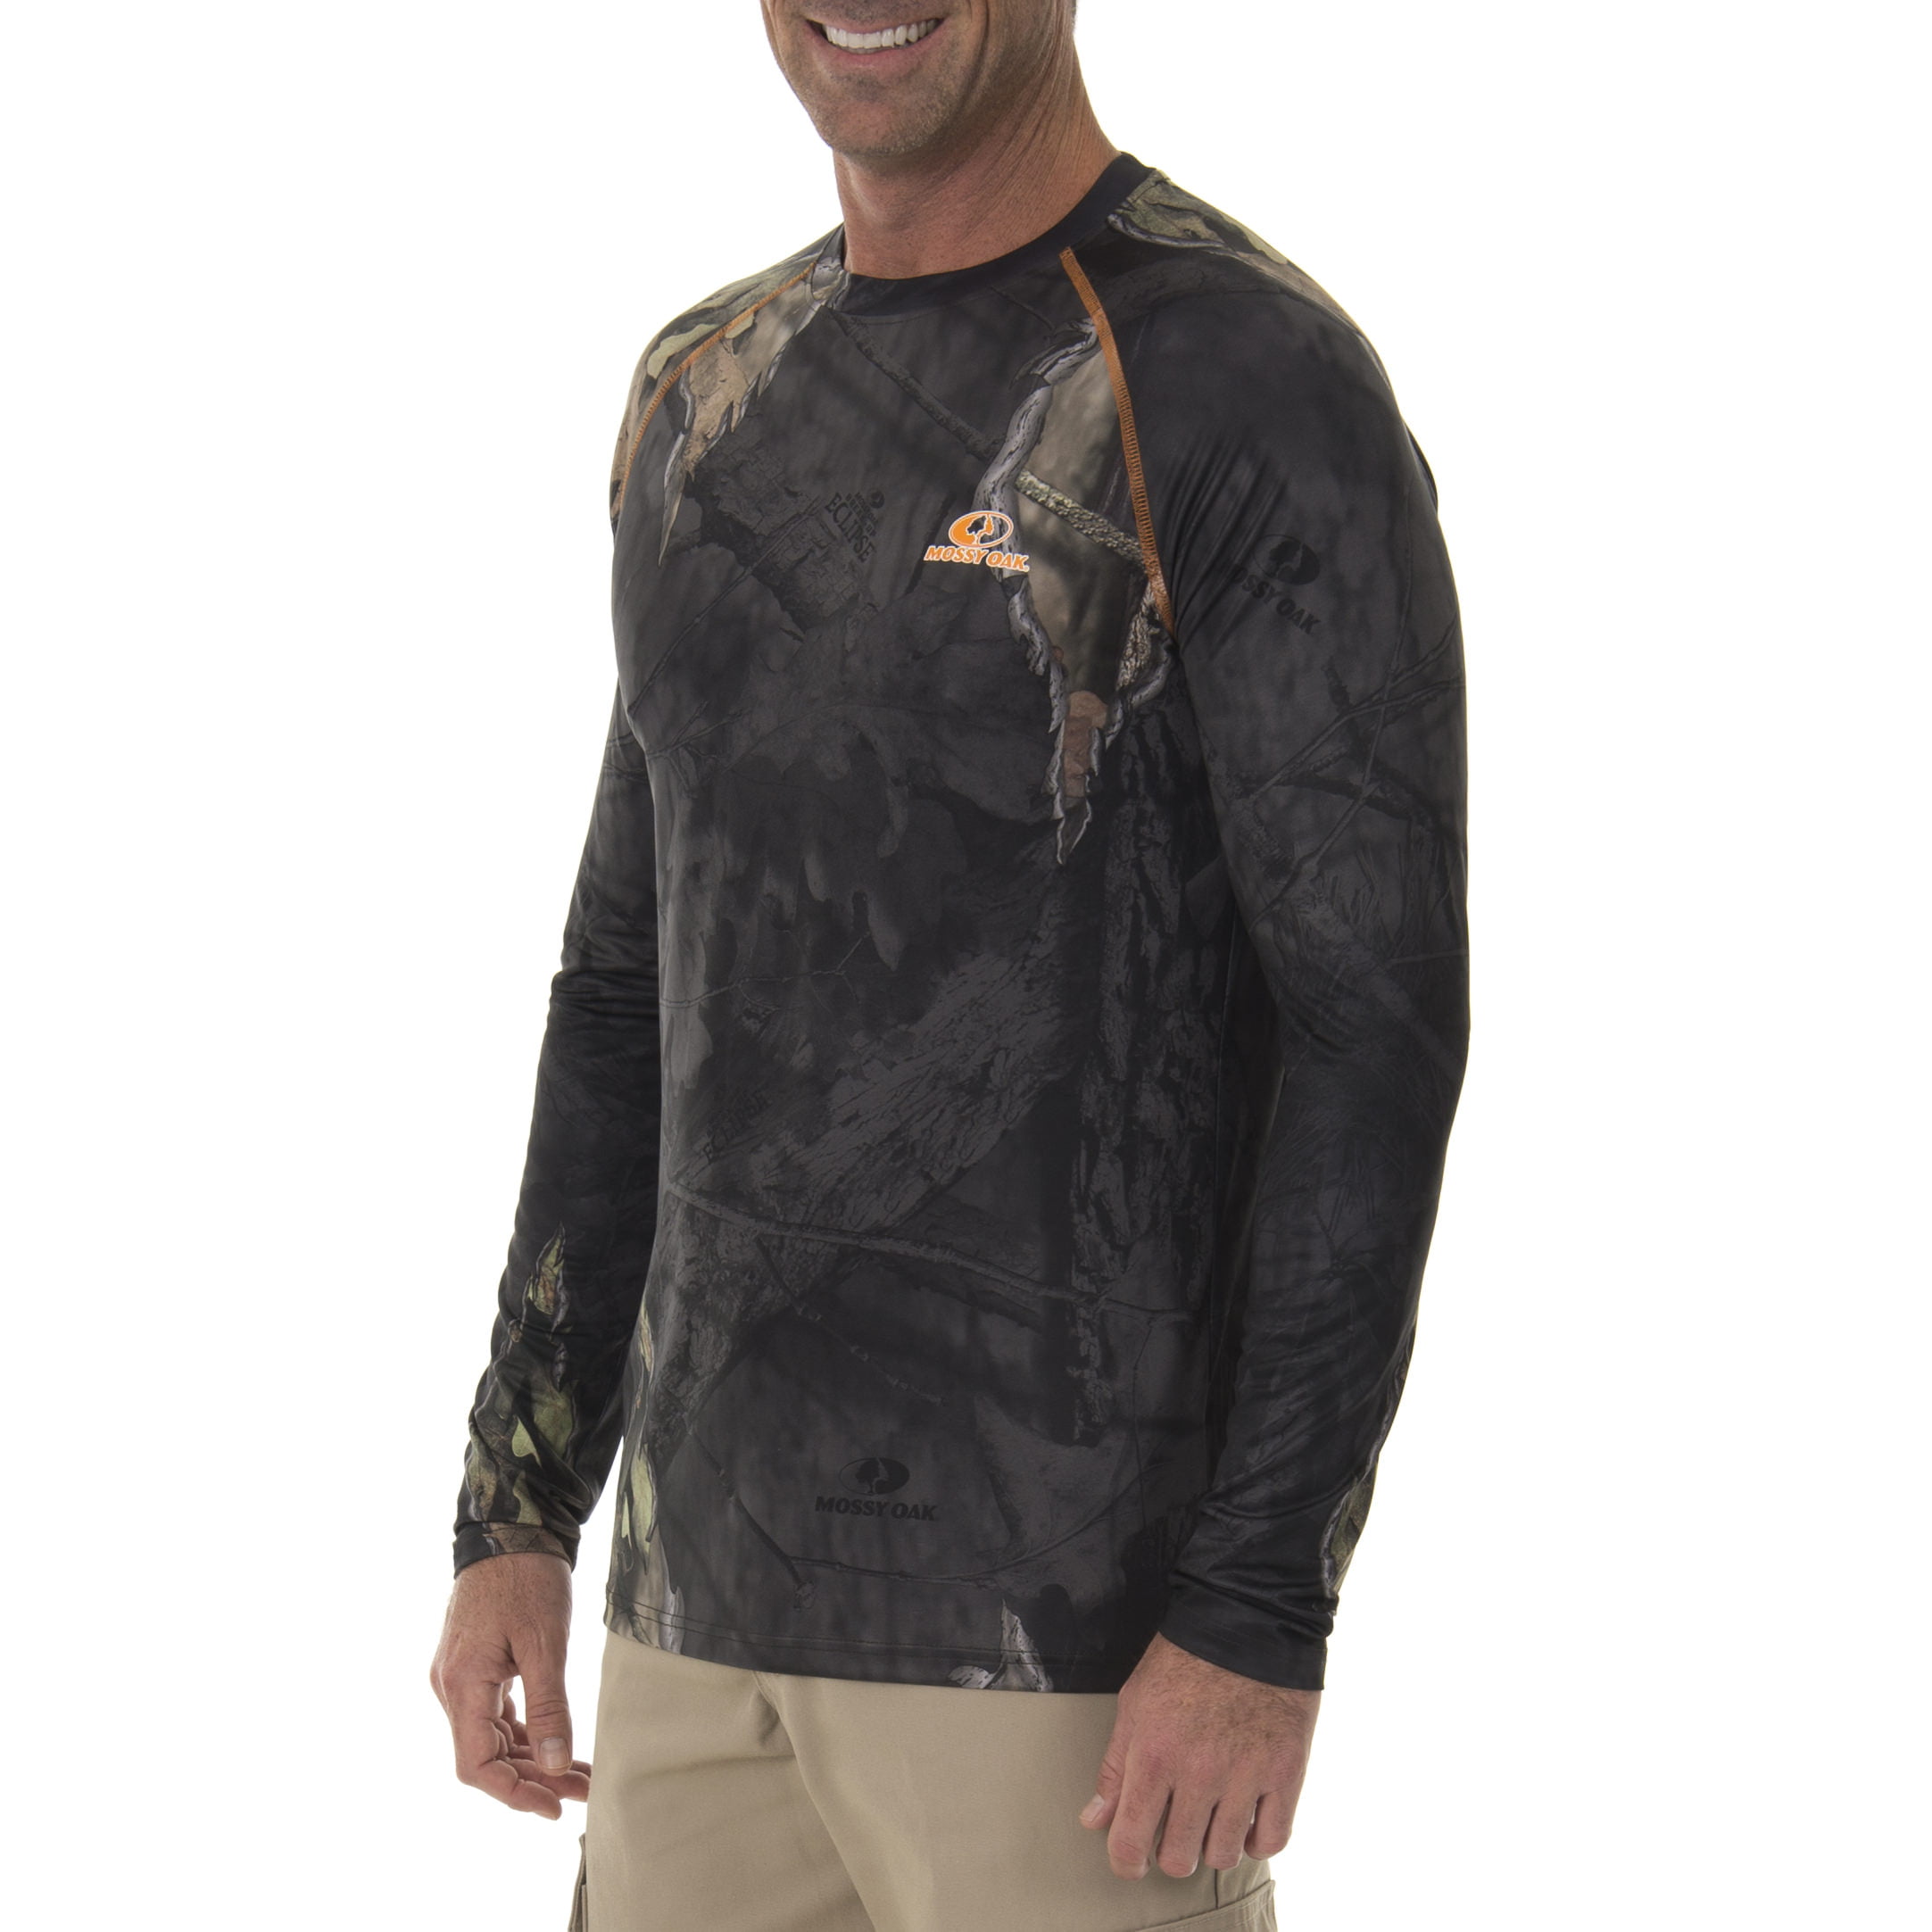 NWT Mens Mossy Oak Eclipse Camo Long Sleeve Insect Repellent Shirt NEW 